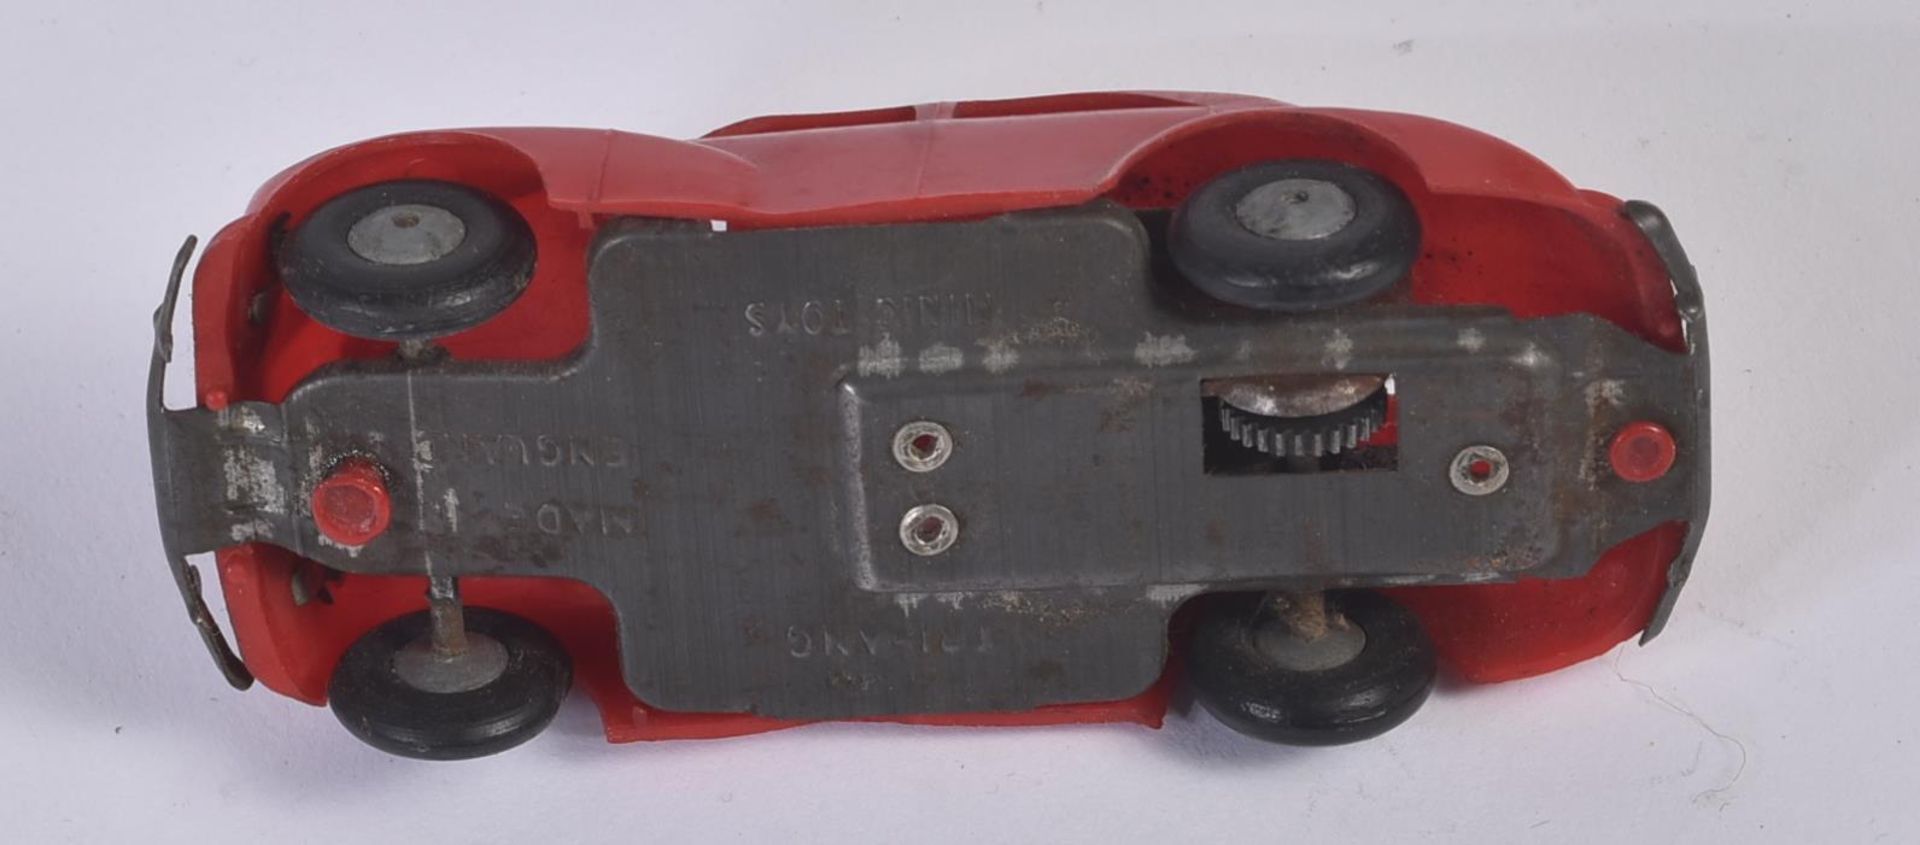 COLLECTION OF ASSORTED VINTAGE TINPLATE / FRICTION MOTOR MODELS - Image 8 of 8